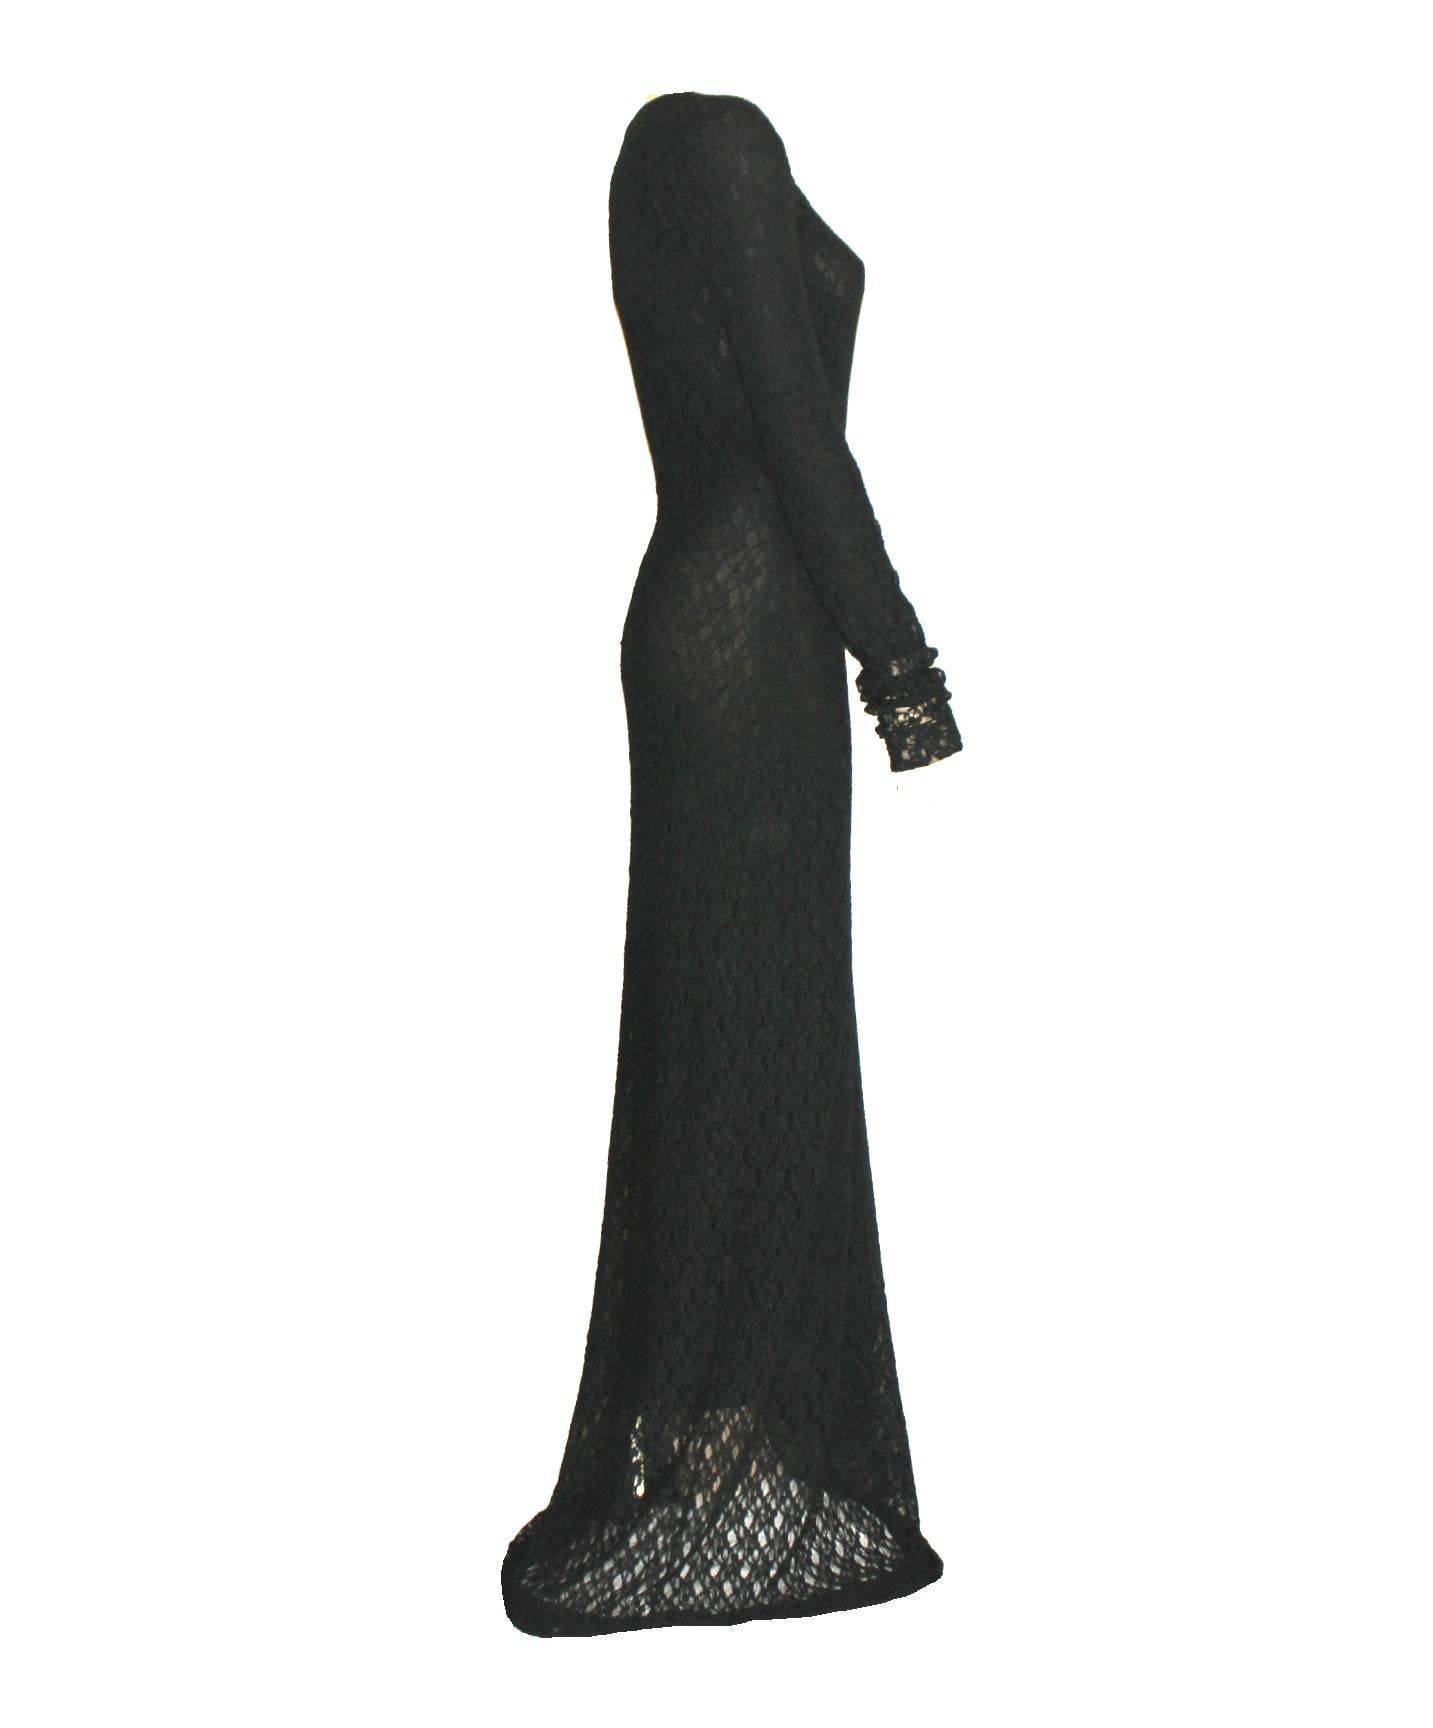 A stunning vintage evening gown by Dolce & Gabbana
This dress dates back to the early 1990s
It is made of a soft 3D structure crochet knit and fully lined
Long sleeves
Full length
A beautiful addition to every wardrobe
